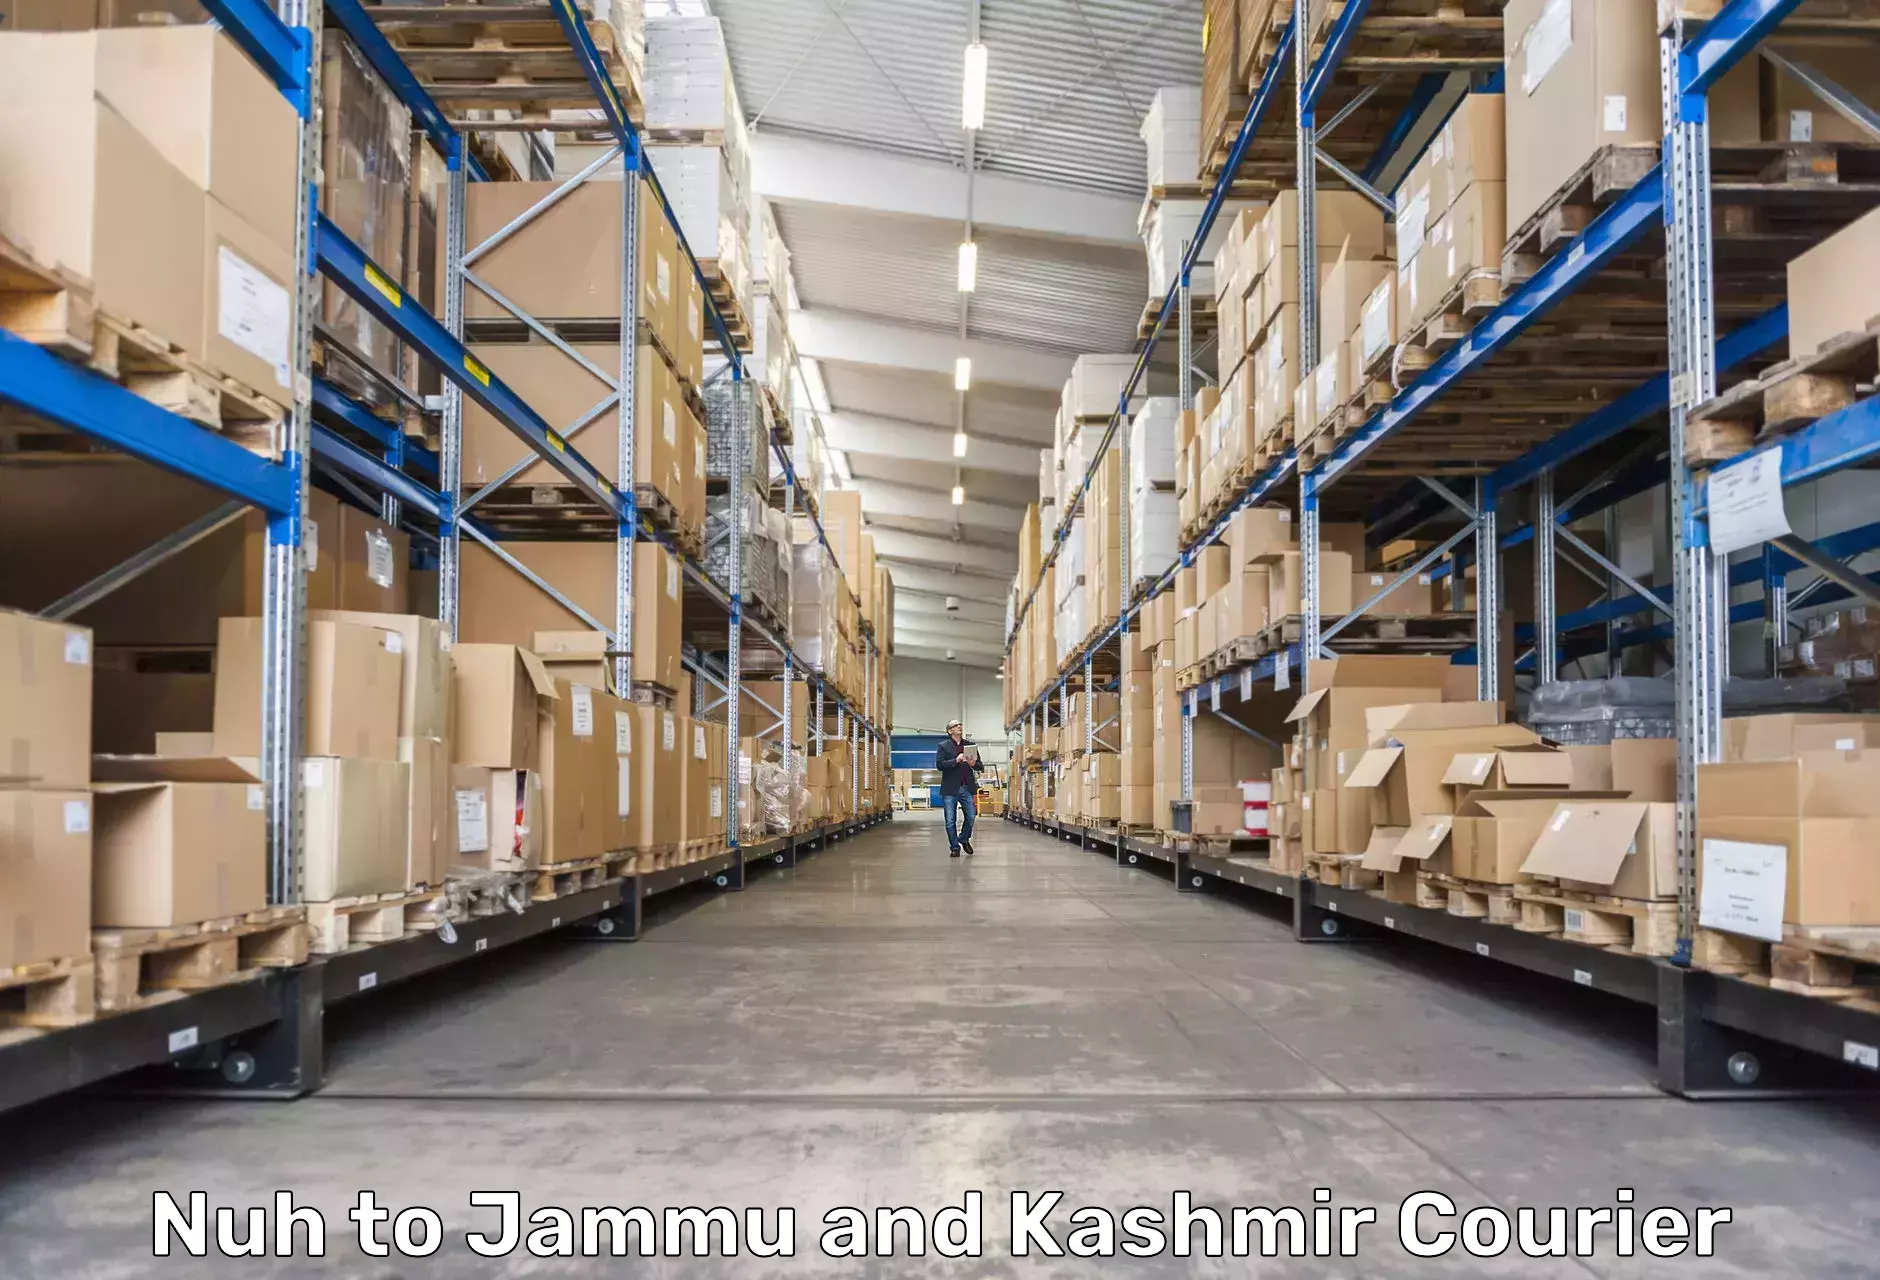 Package delivery network Nuh to University of Jammu